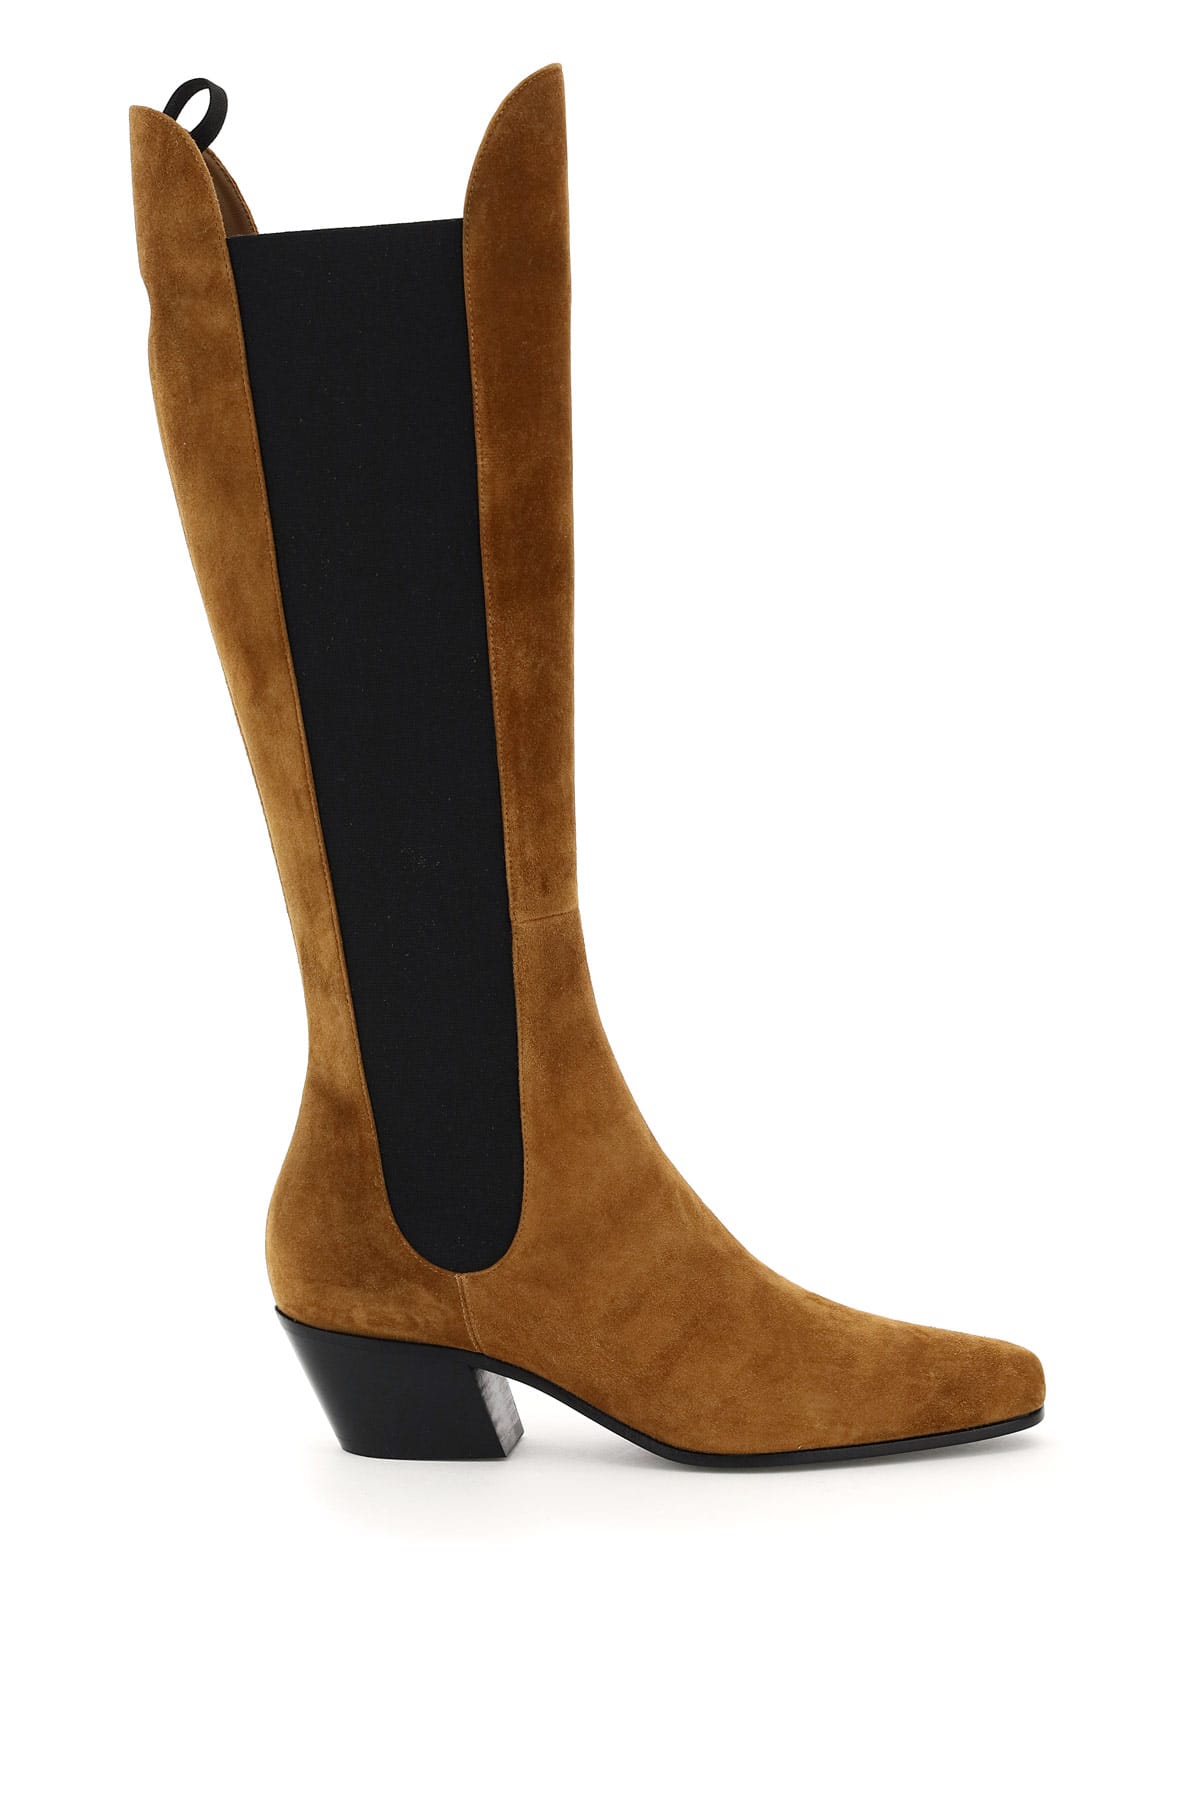 Khaite Chester Knee High Suede Chelsea Boots